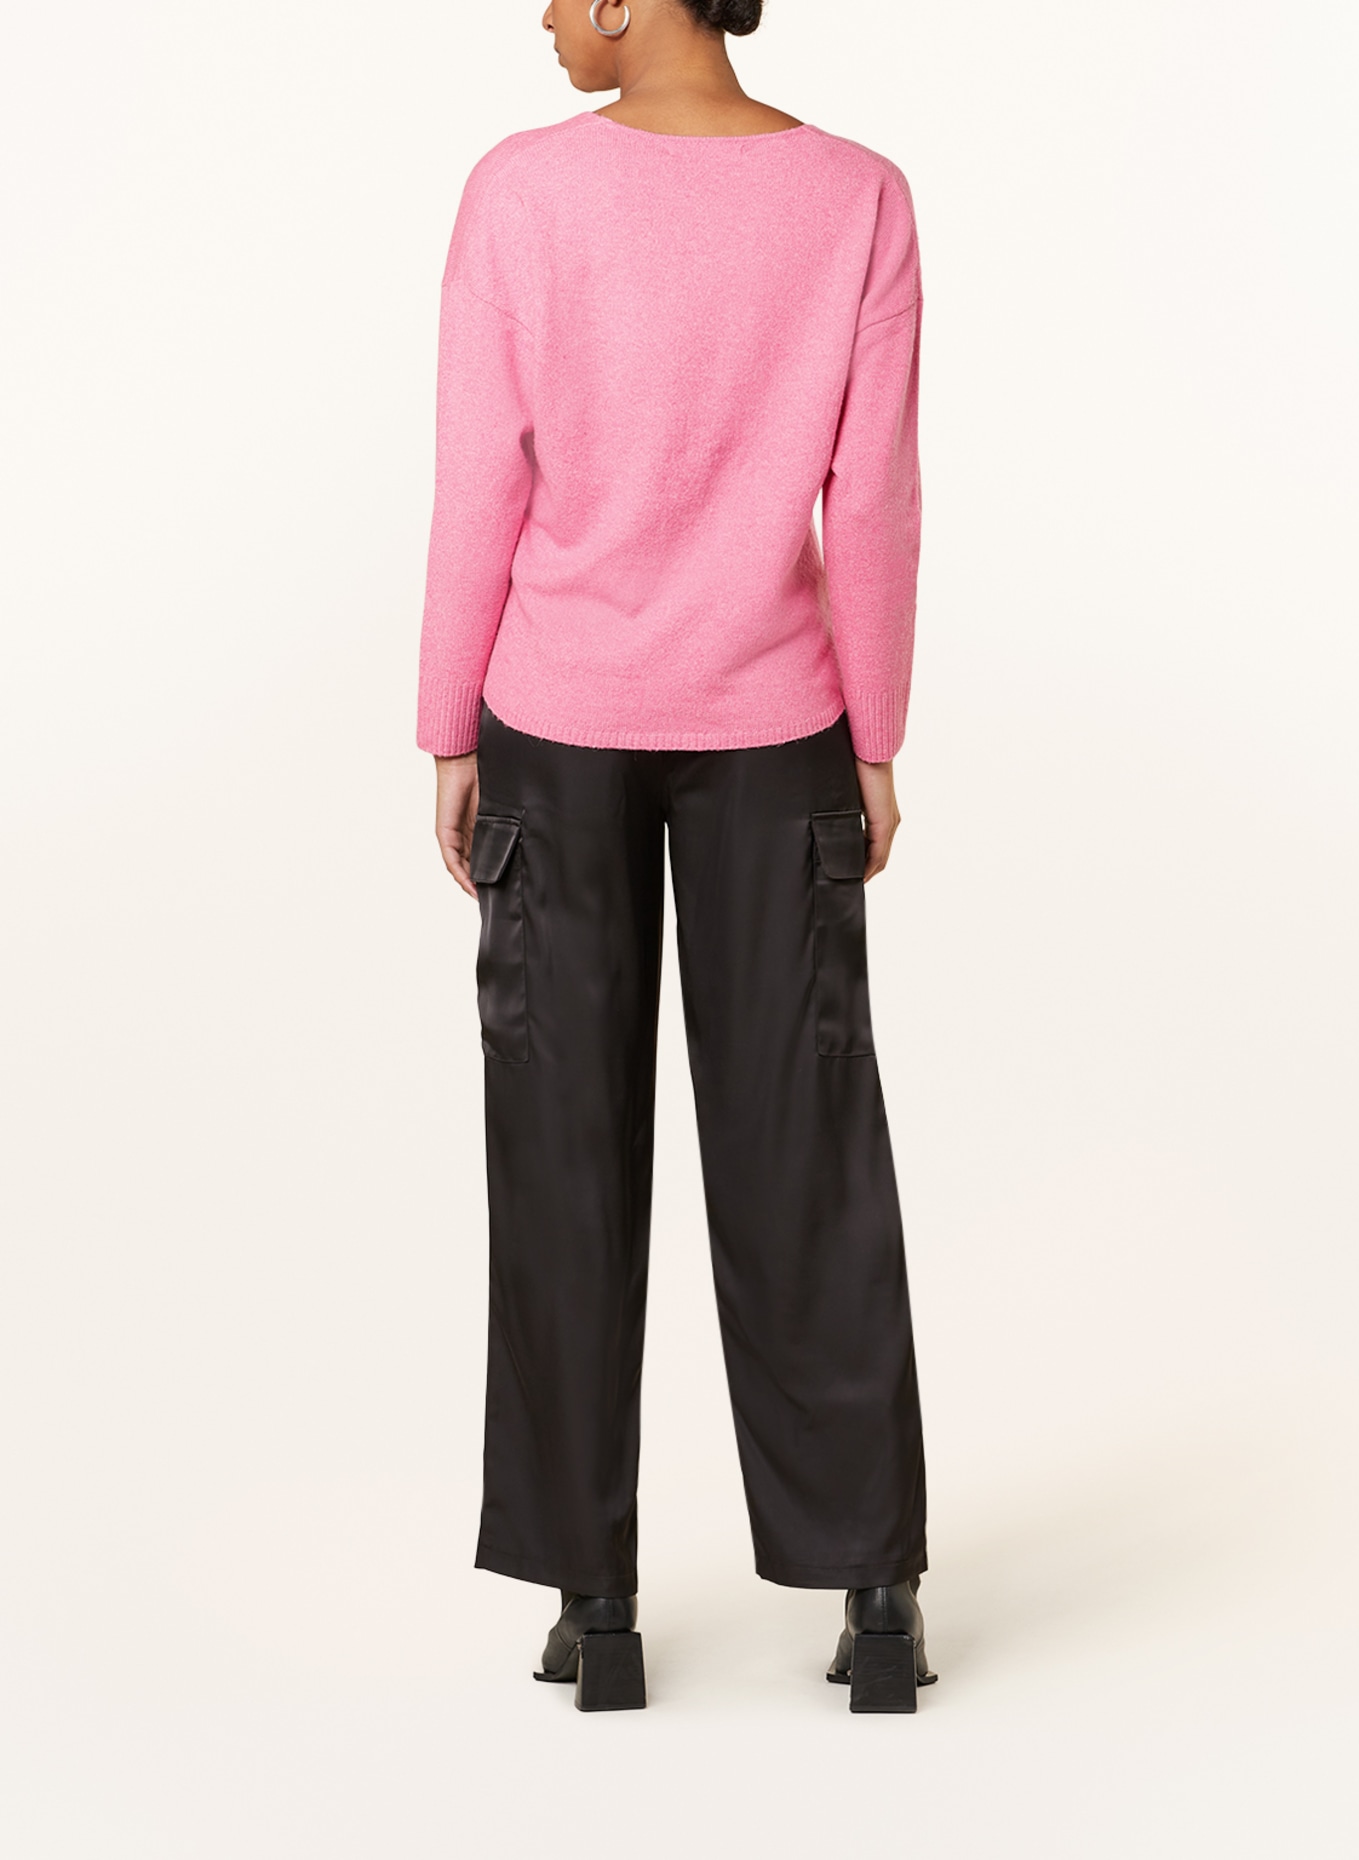 ONLY Sweater, Color: PINK (Image 3)